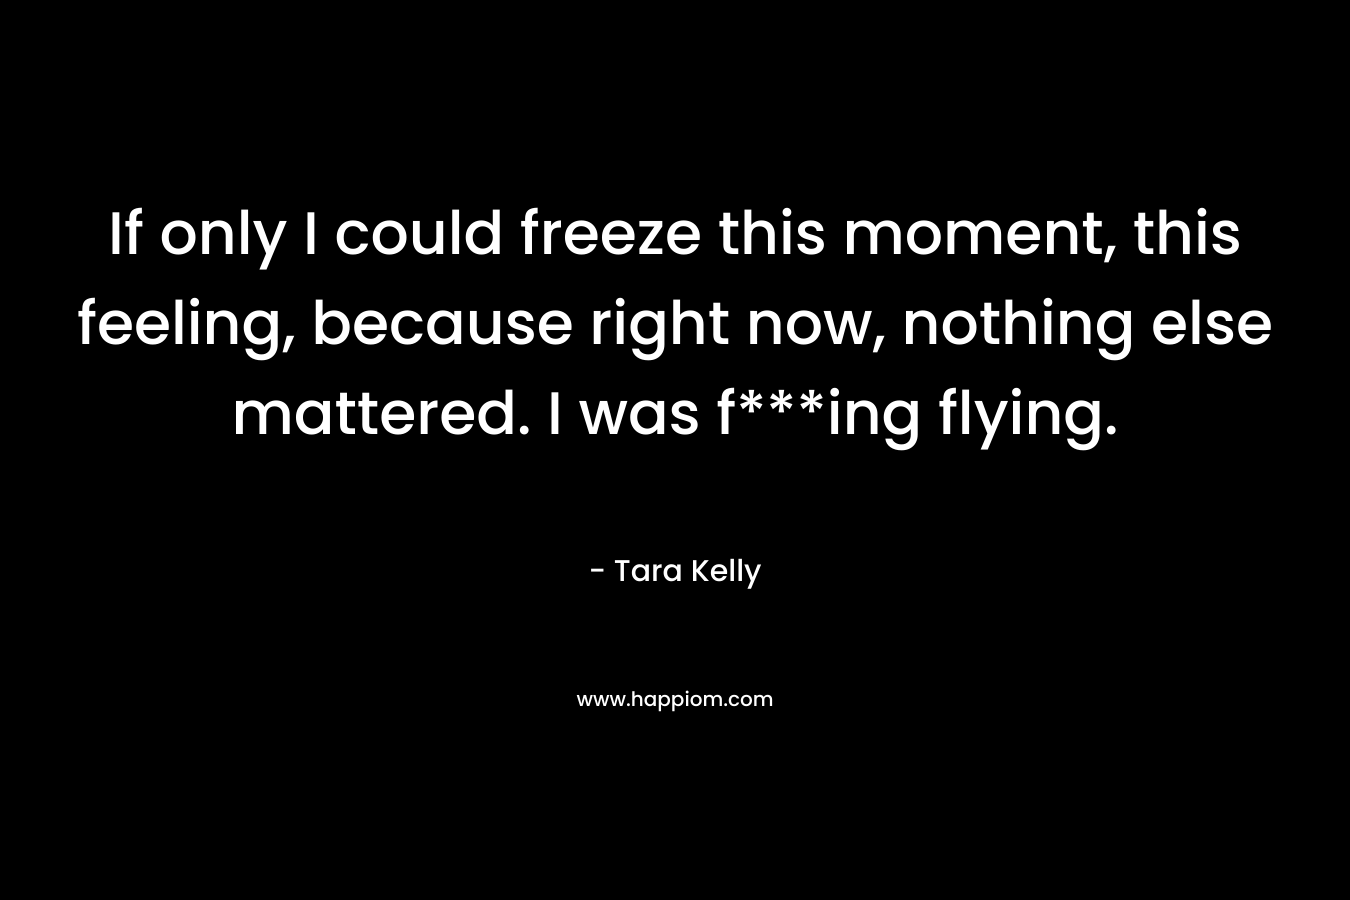 If only I could	freeze this moment, this feeling, because right	now, nothing else mattered. I was f***ing flying. – Tara Kelly